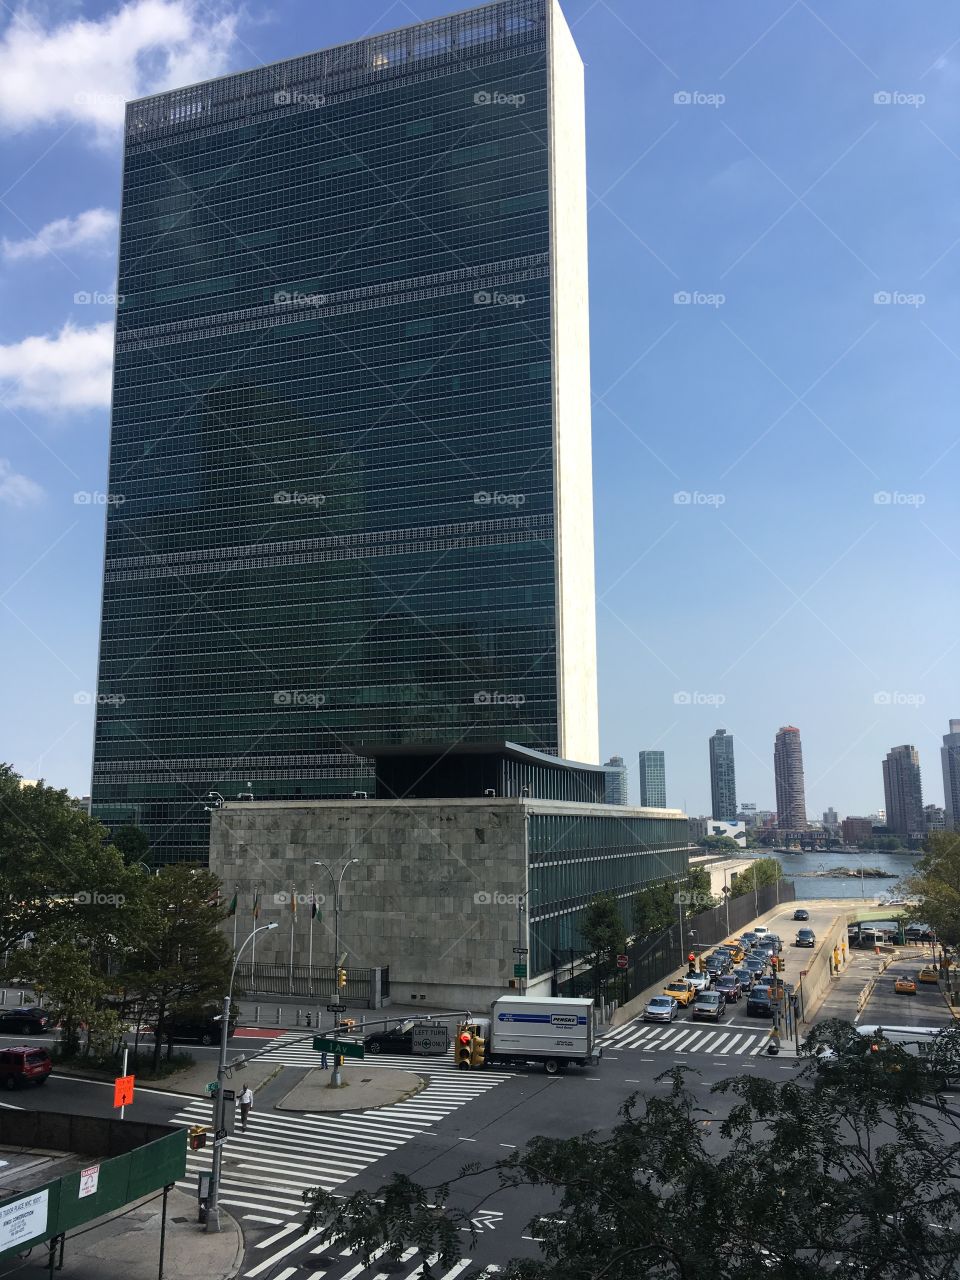 UN Building from the back